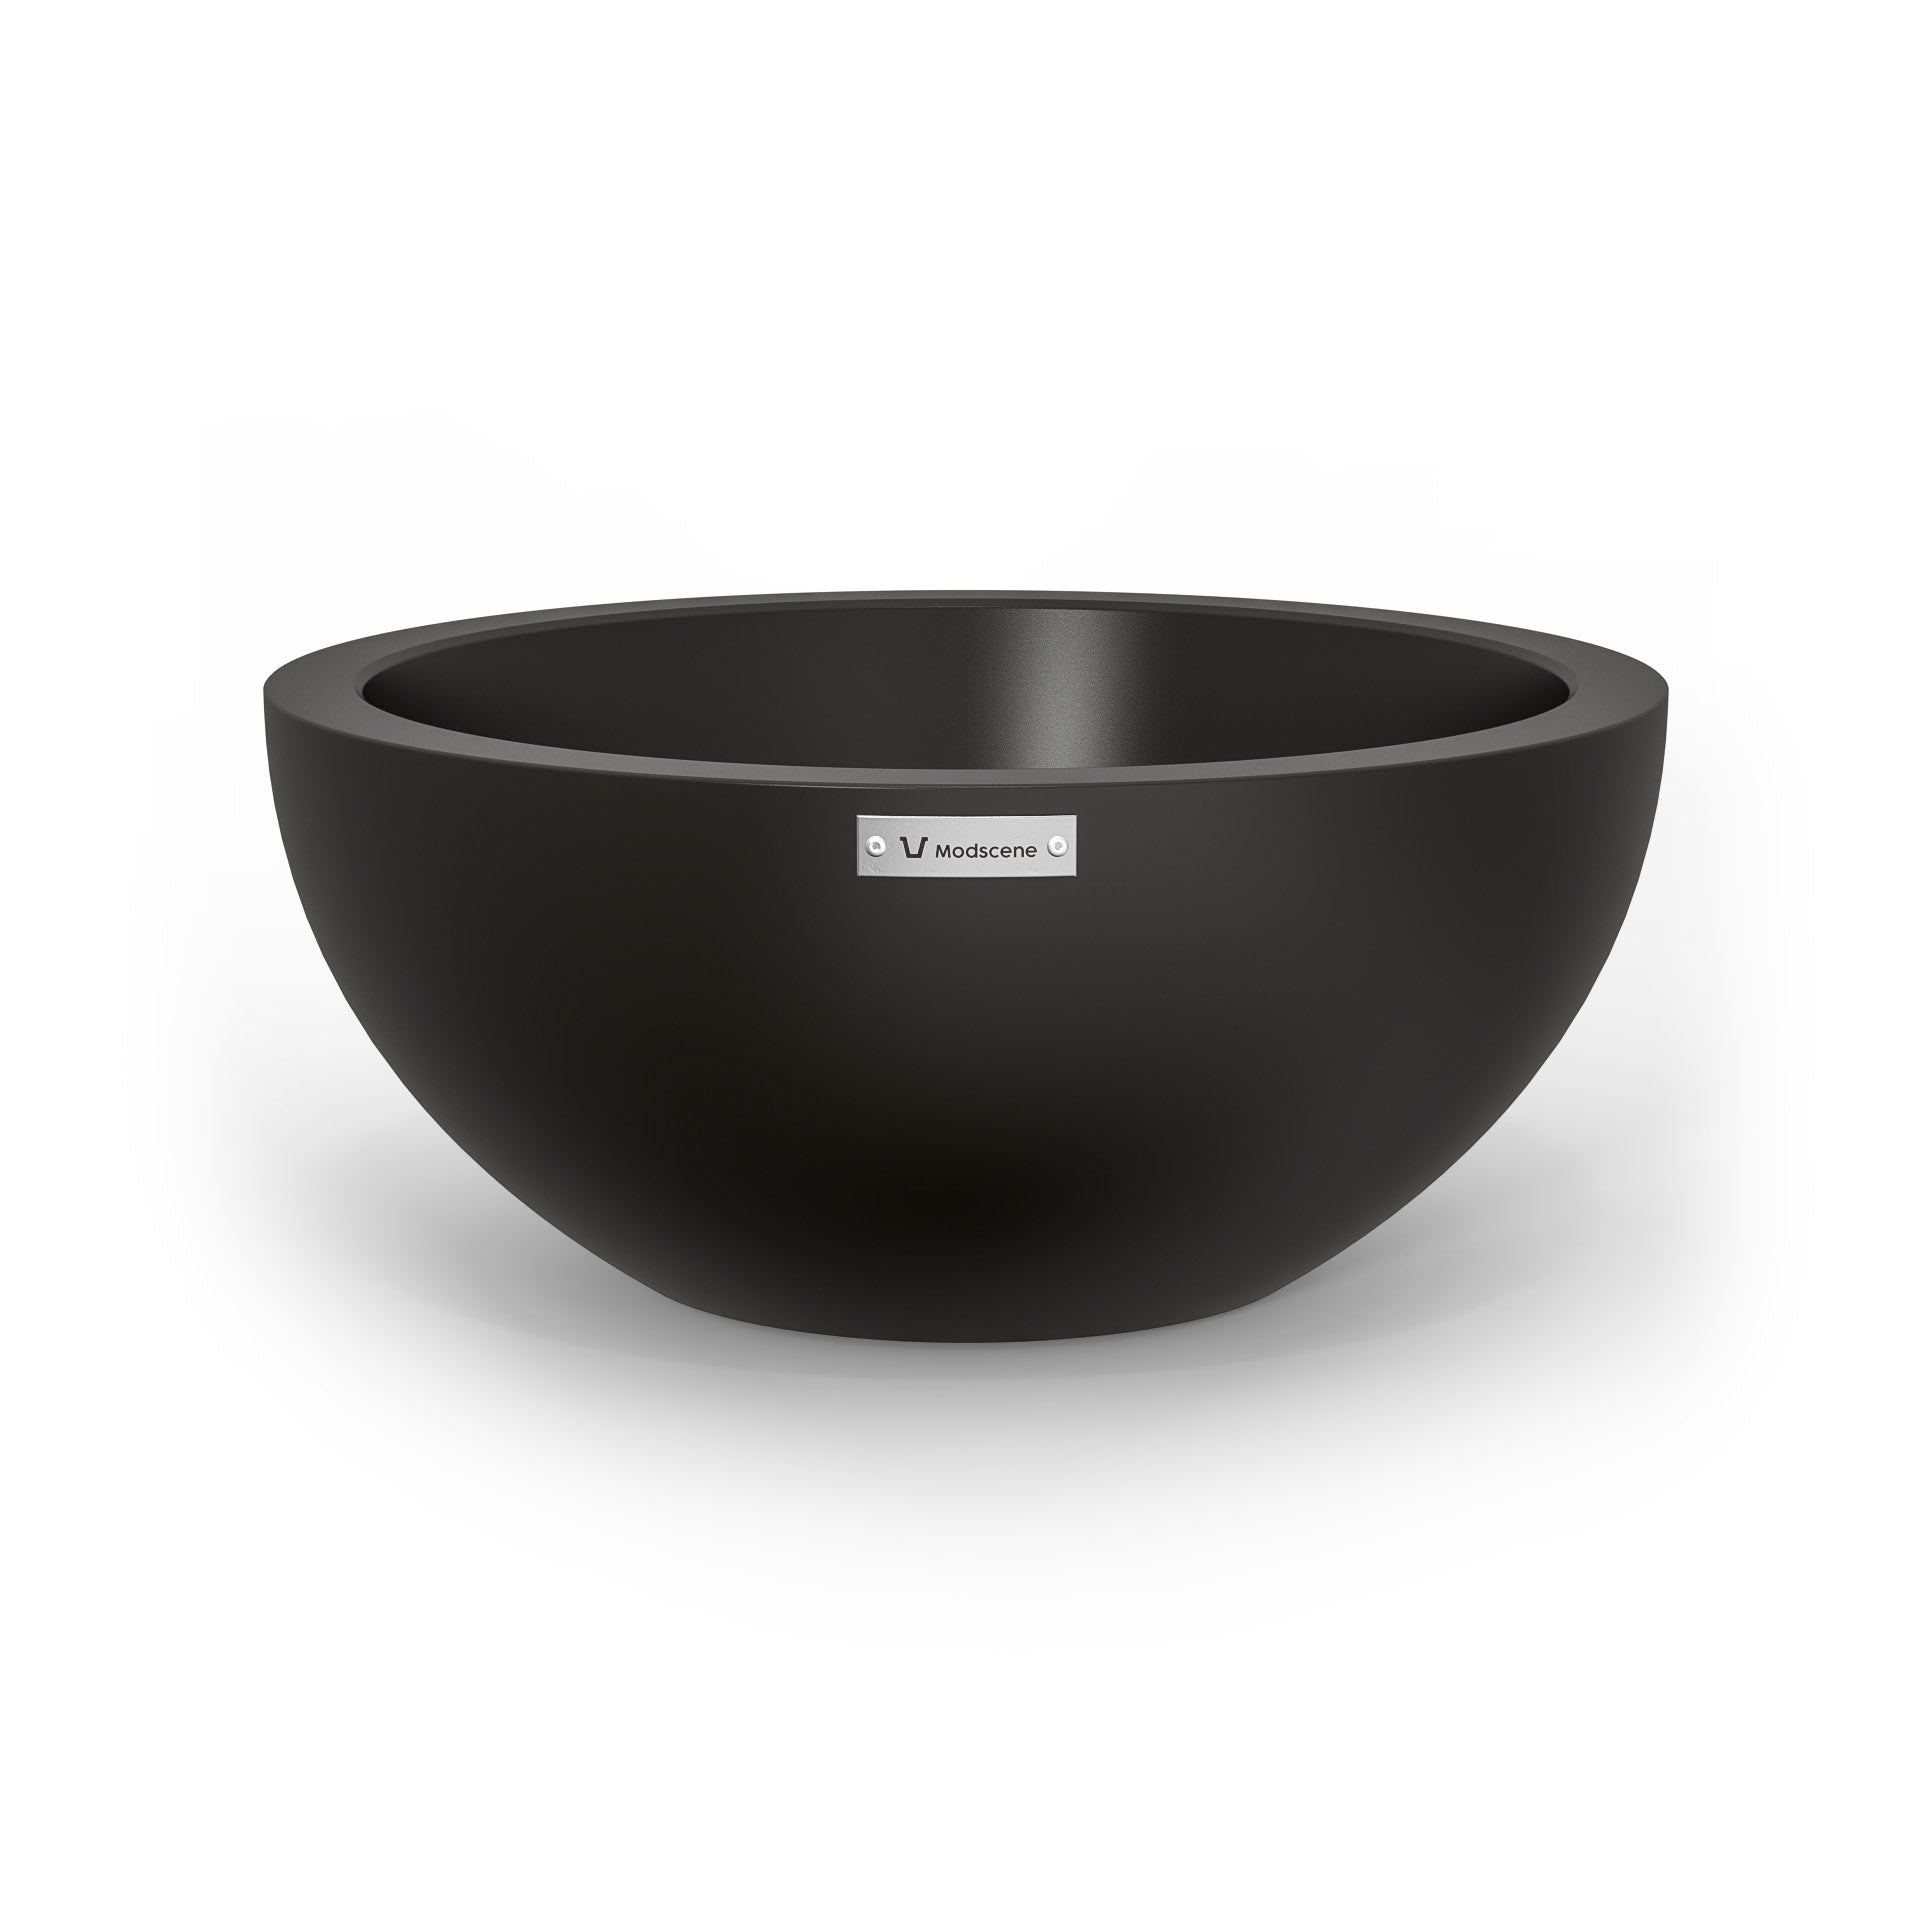 A small planter bowl in black made by Modscene.